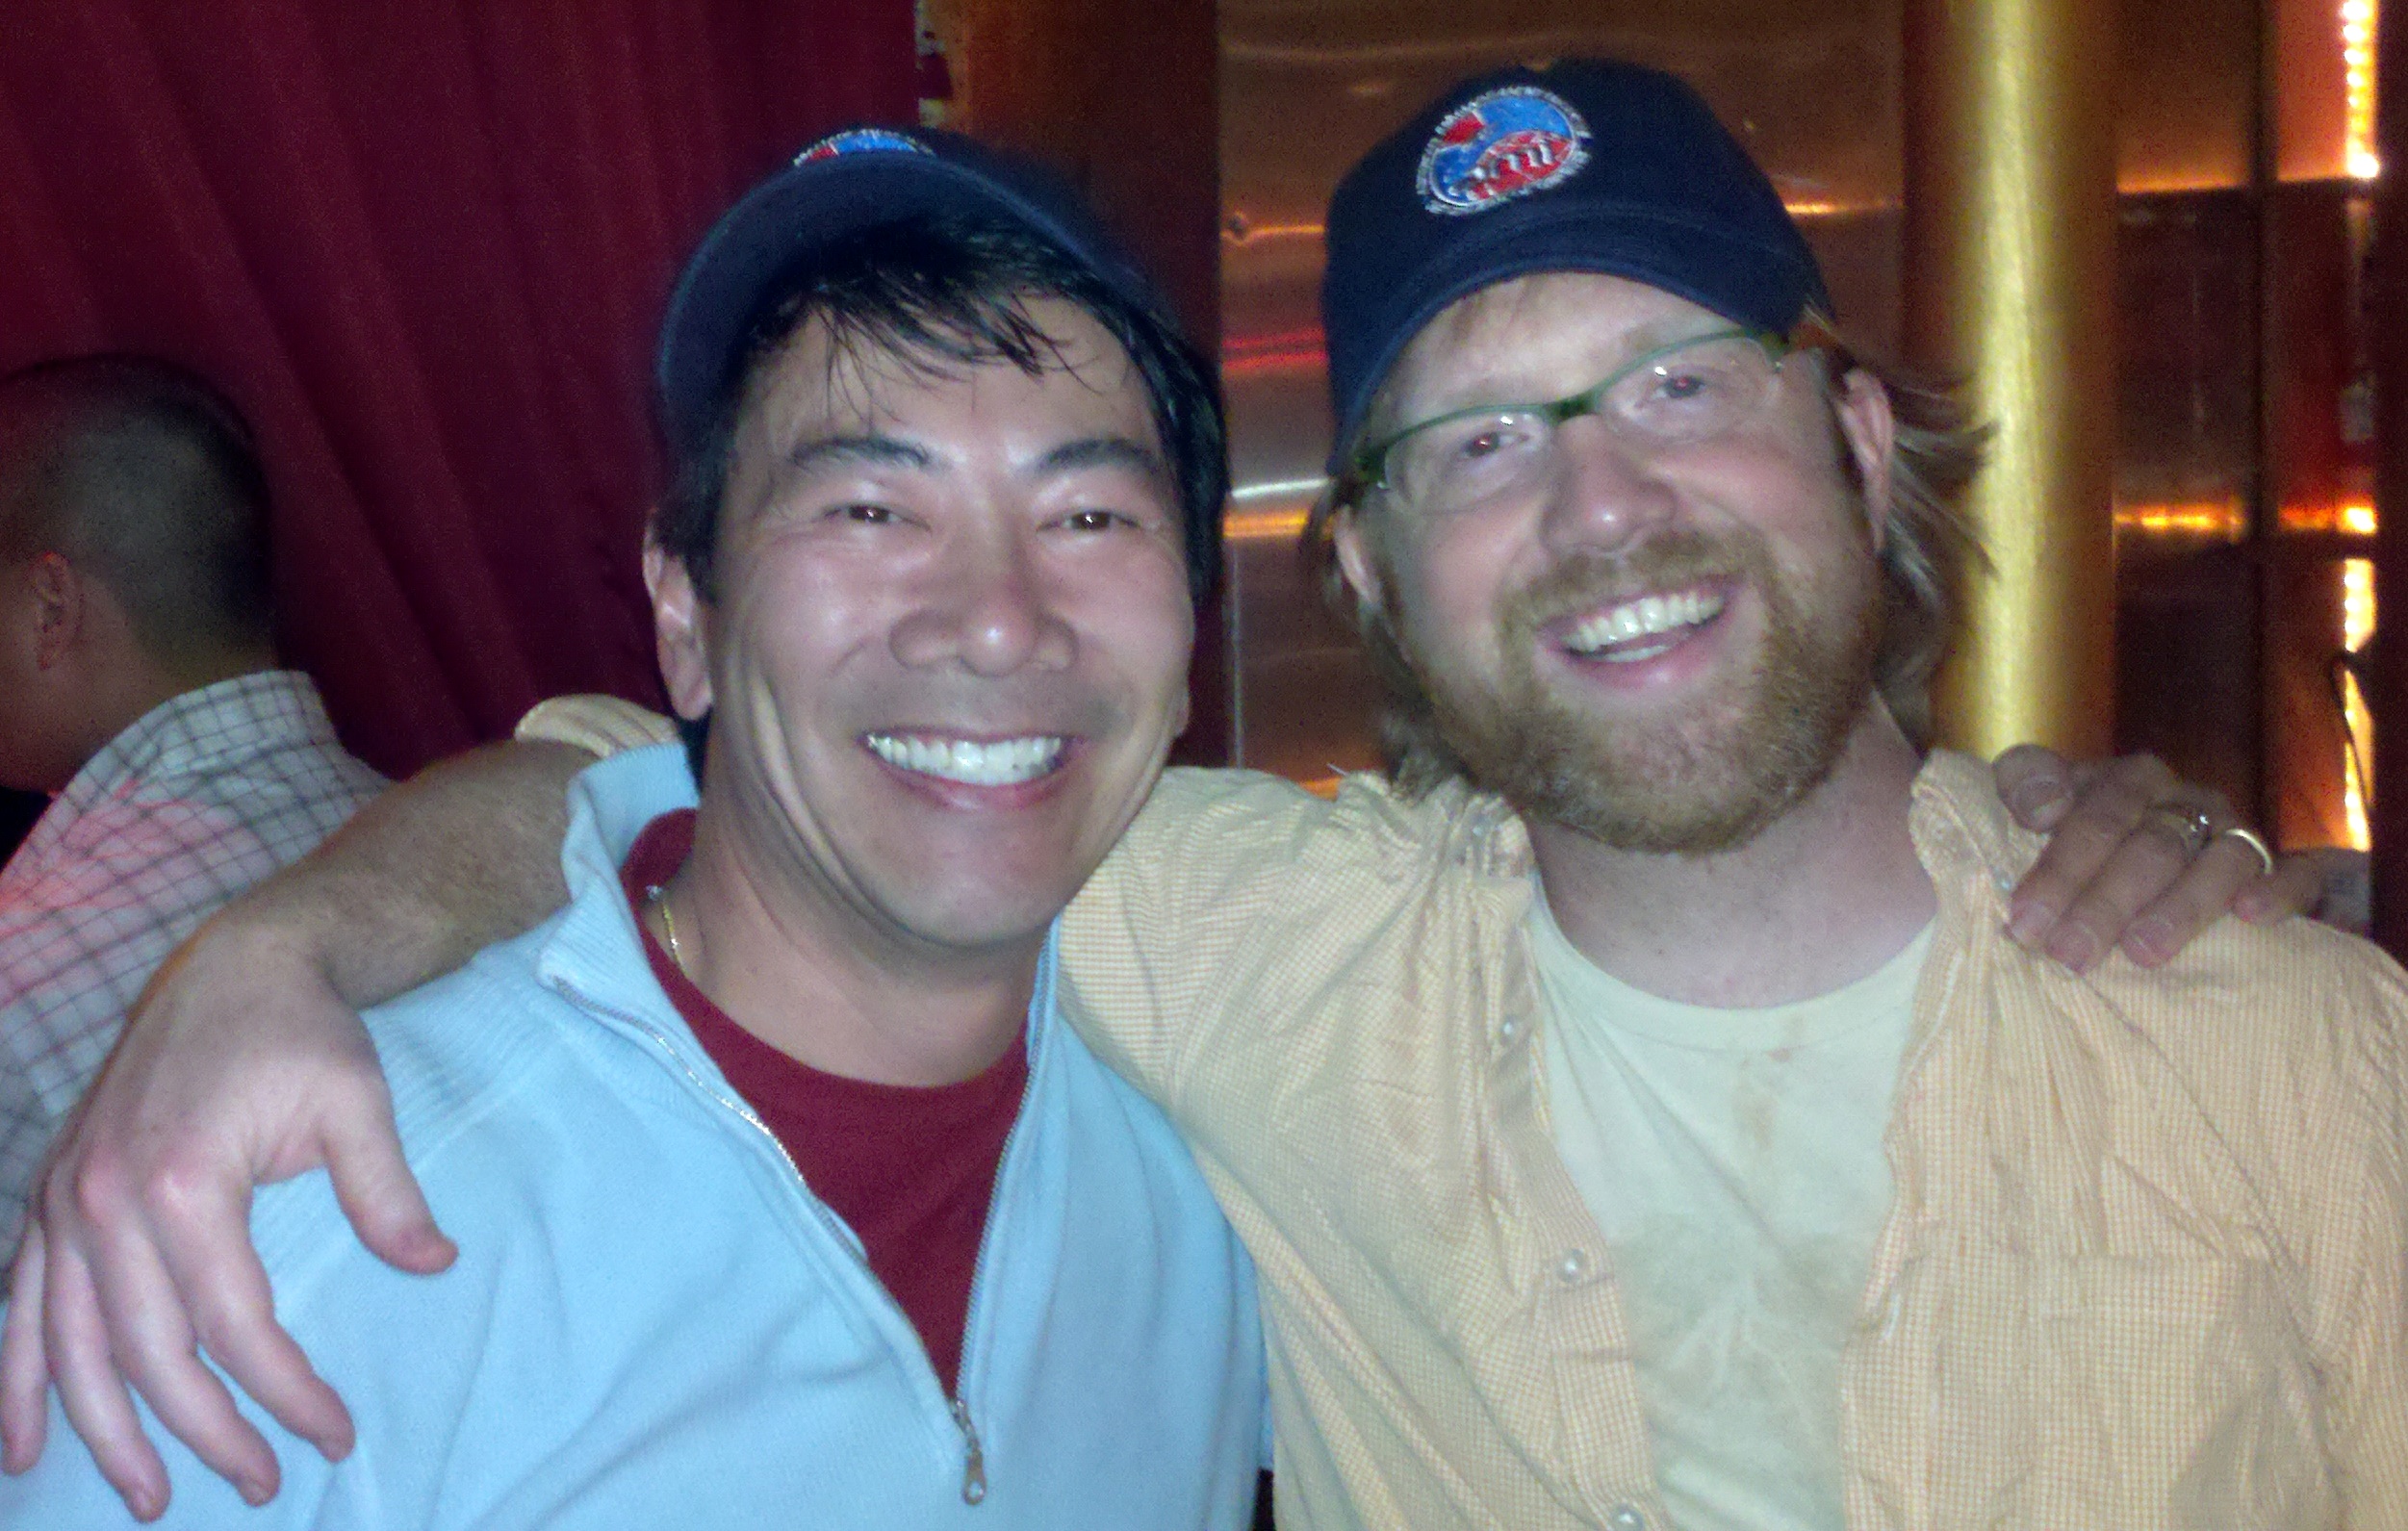 Ptolemy Slocum and Craig Lew at the Rock Jocks Wrap Party